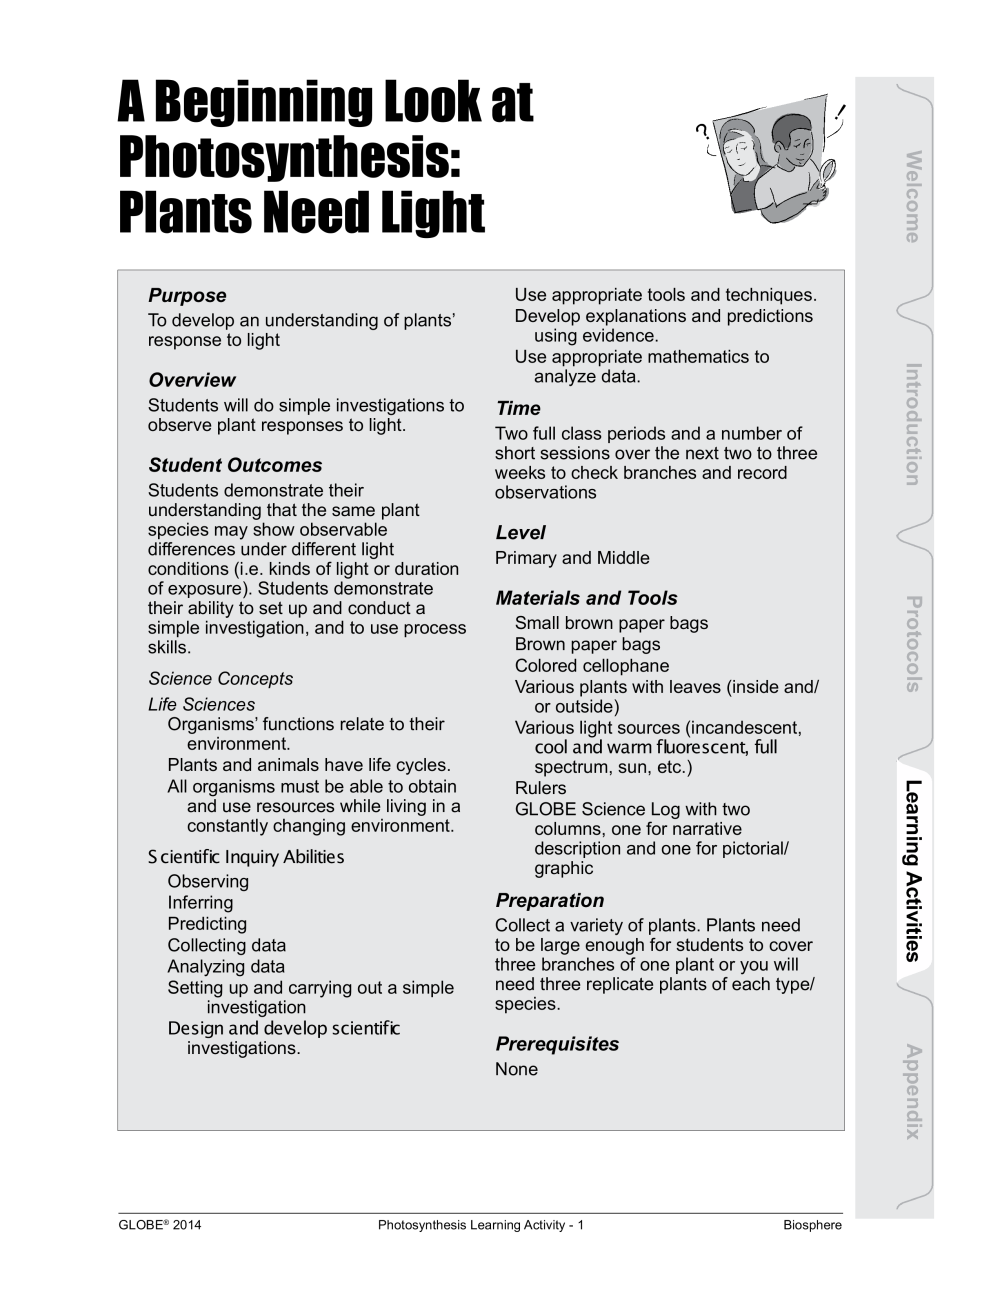 Learning Activities preview for A Beginning Look at Photosynthesis